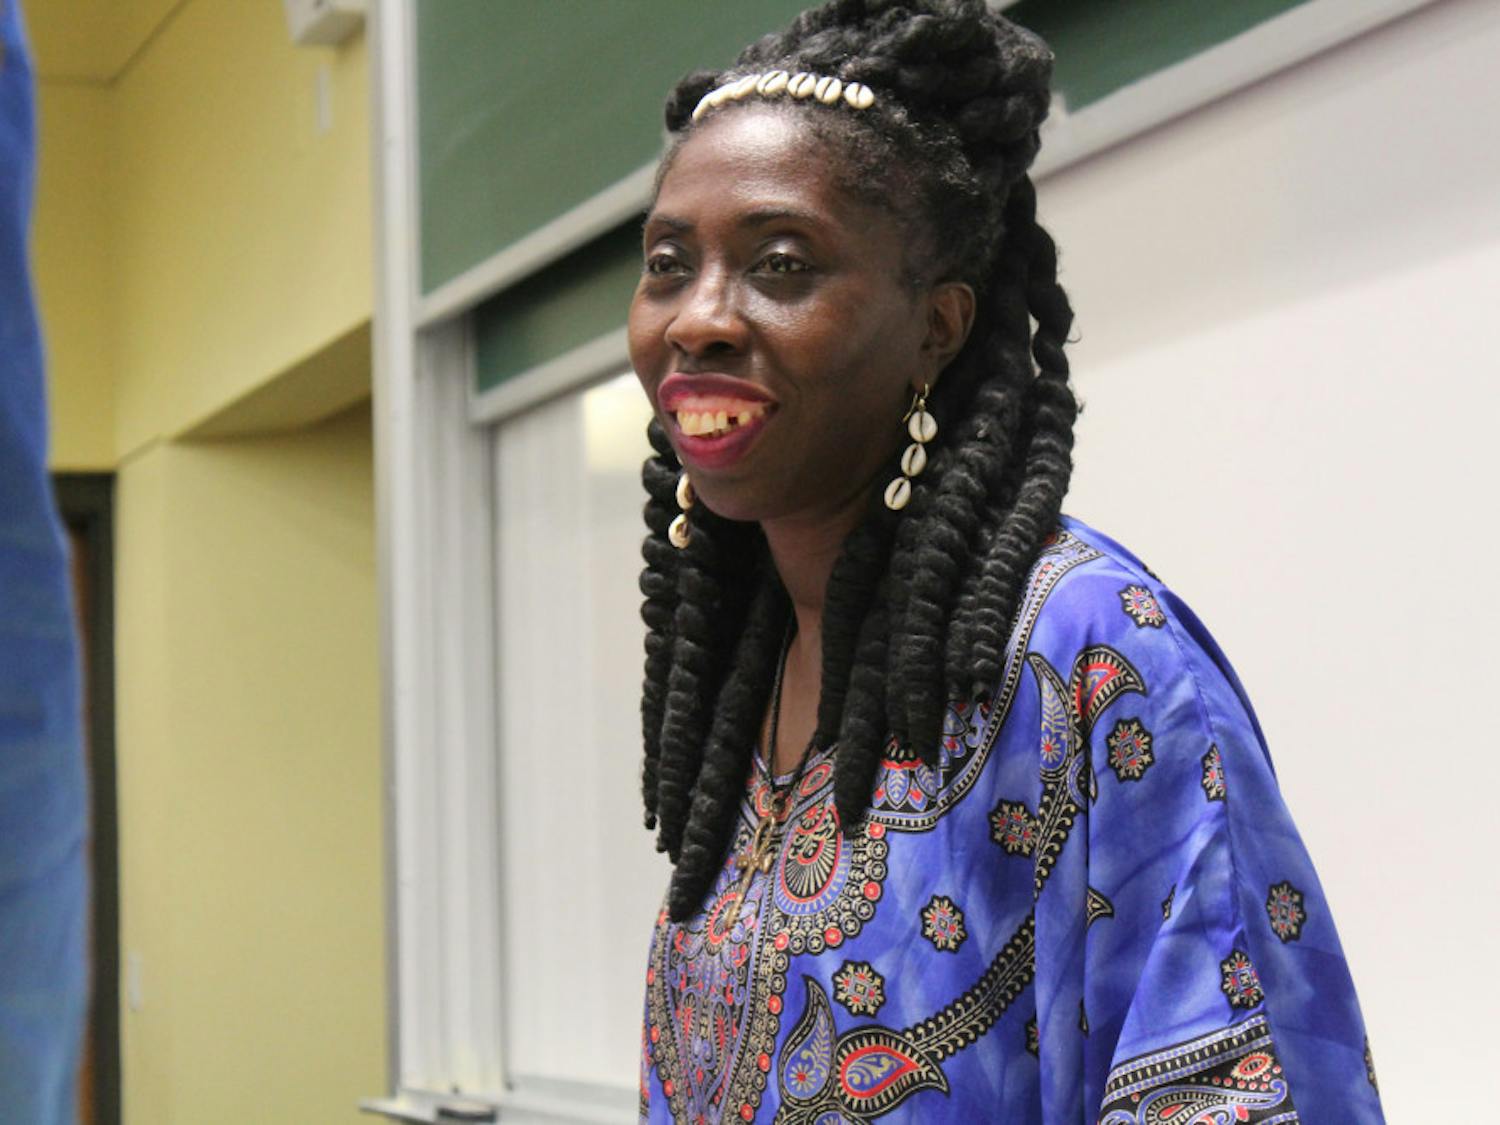 Queen Quet, the chieftess and head of state of the Gullah Geechee nation, talked with attendees after her speech at UF Tuesday night. She is from Saint Helena Island in South Carolina. 